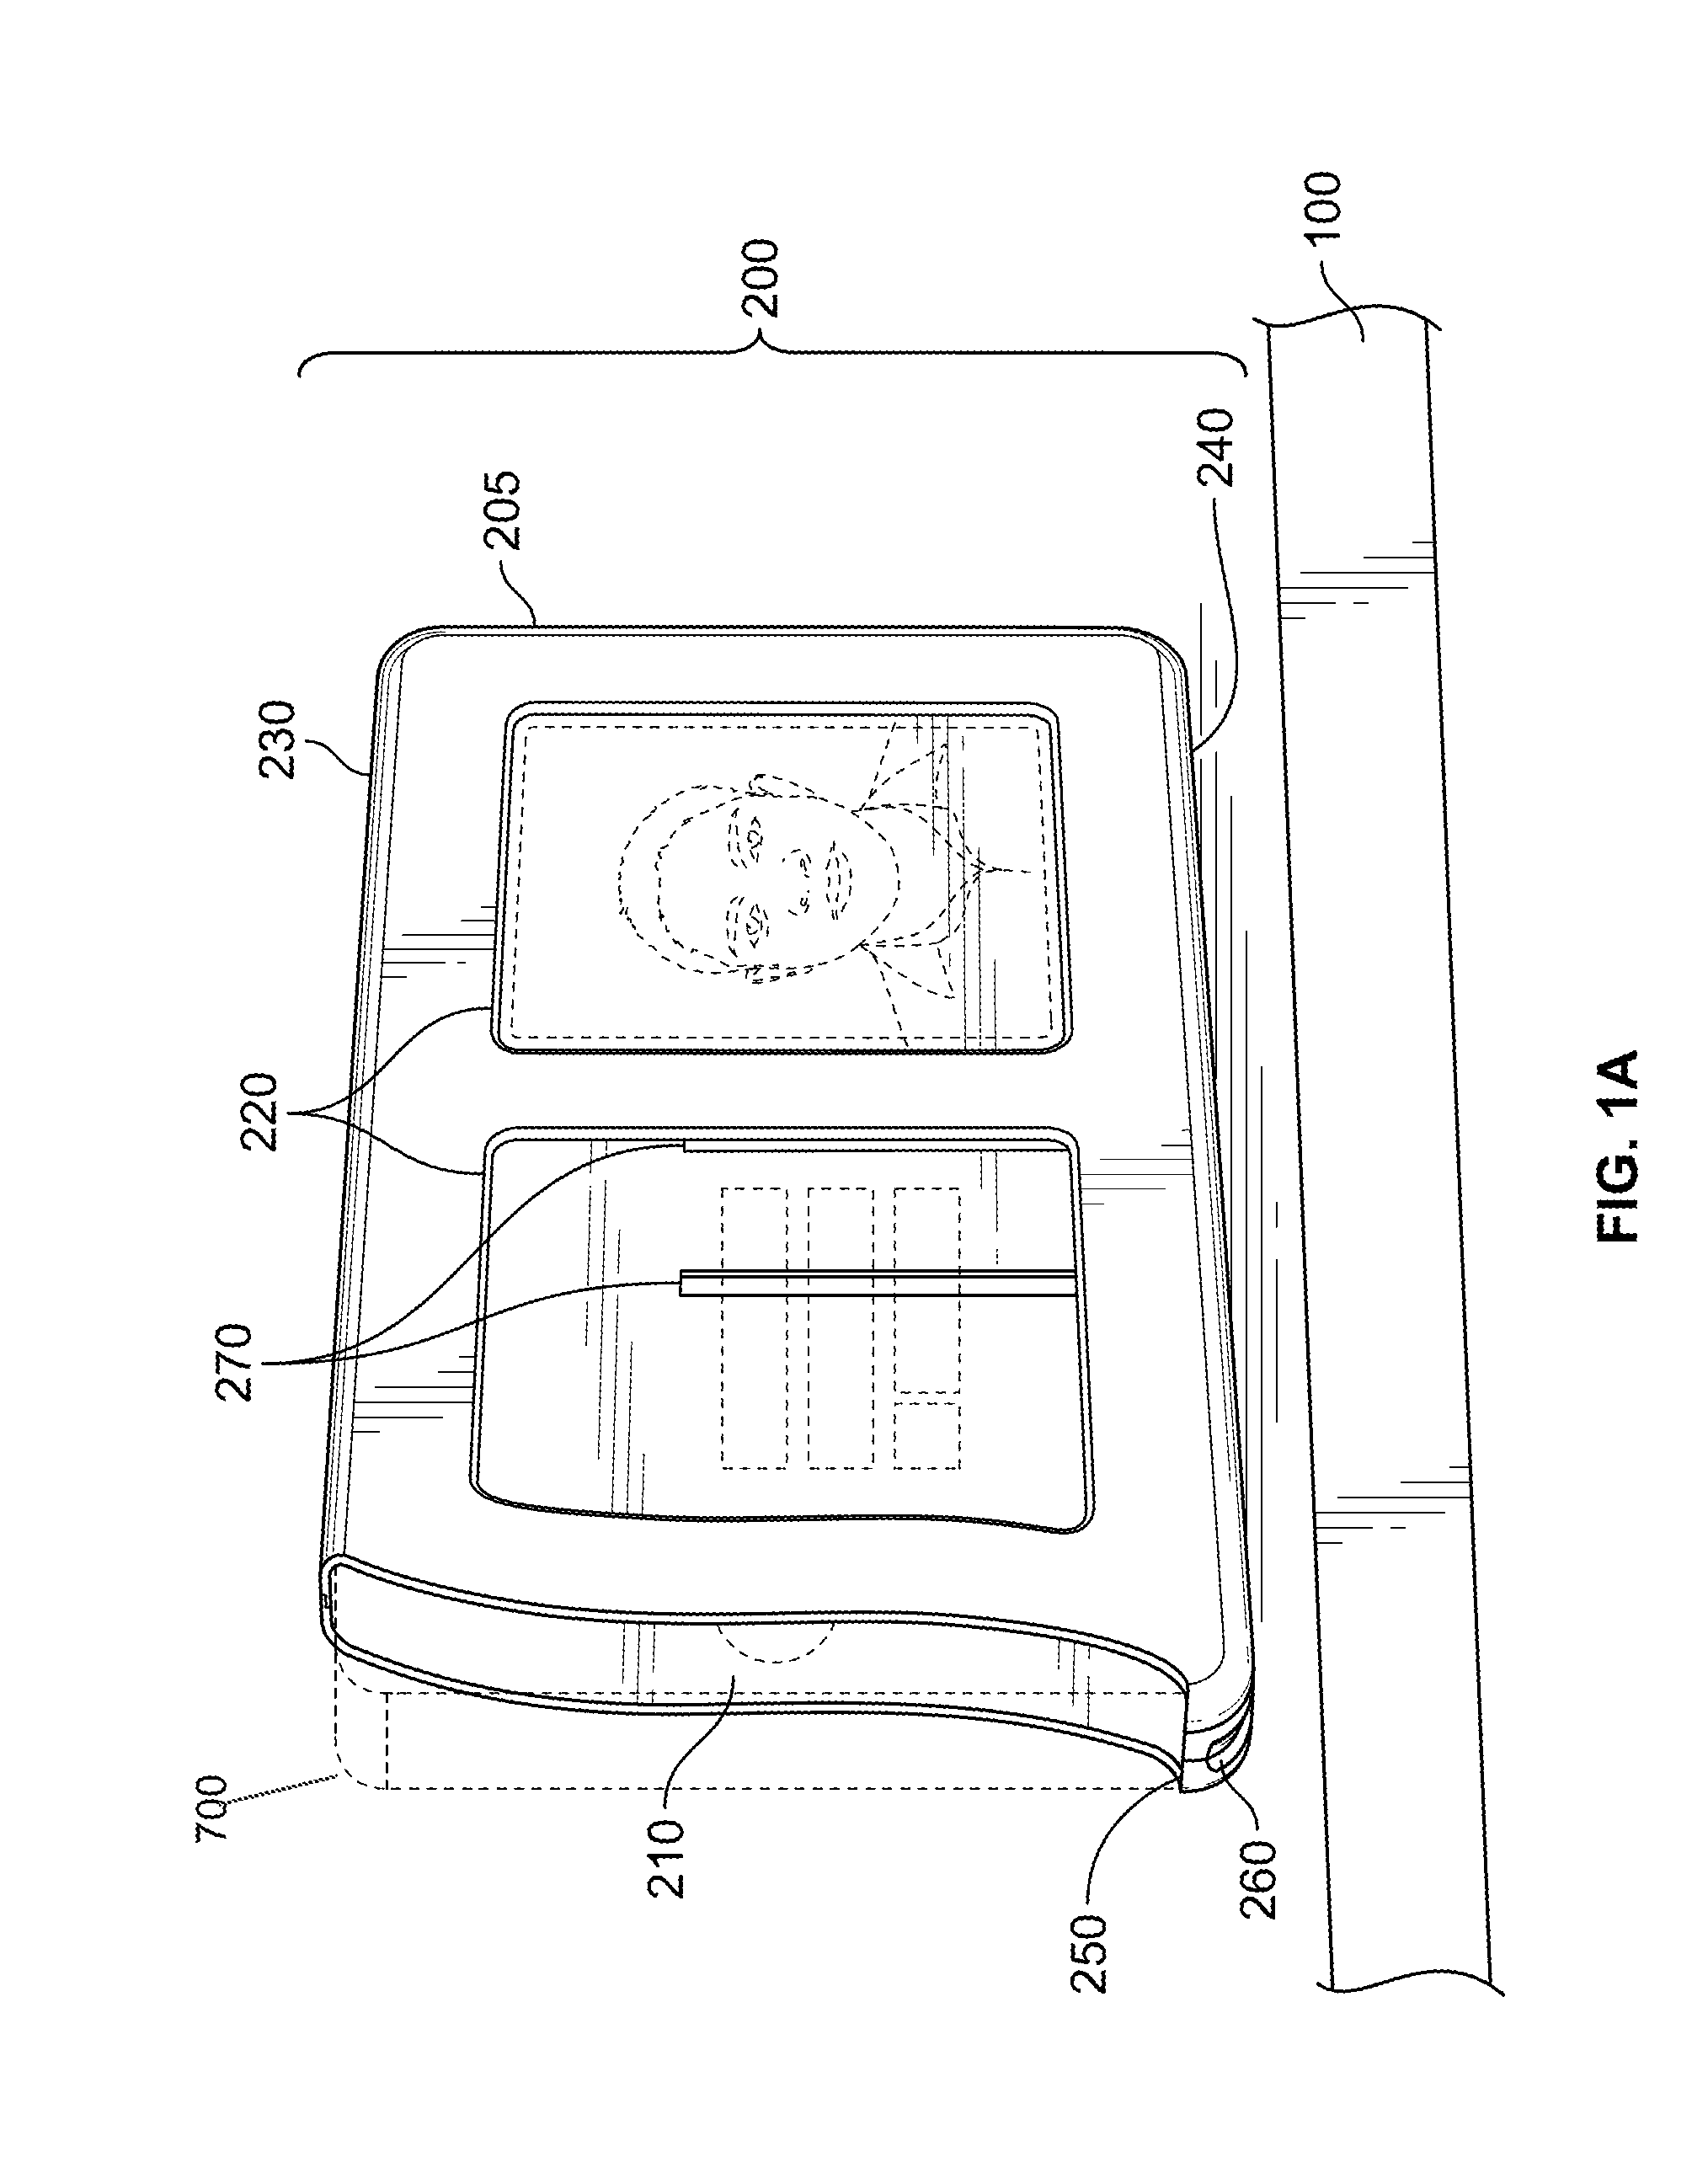 Docking station for portable electronic device